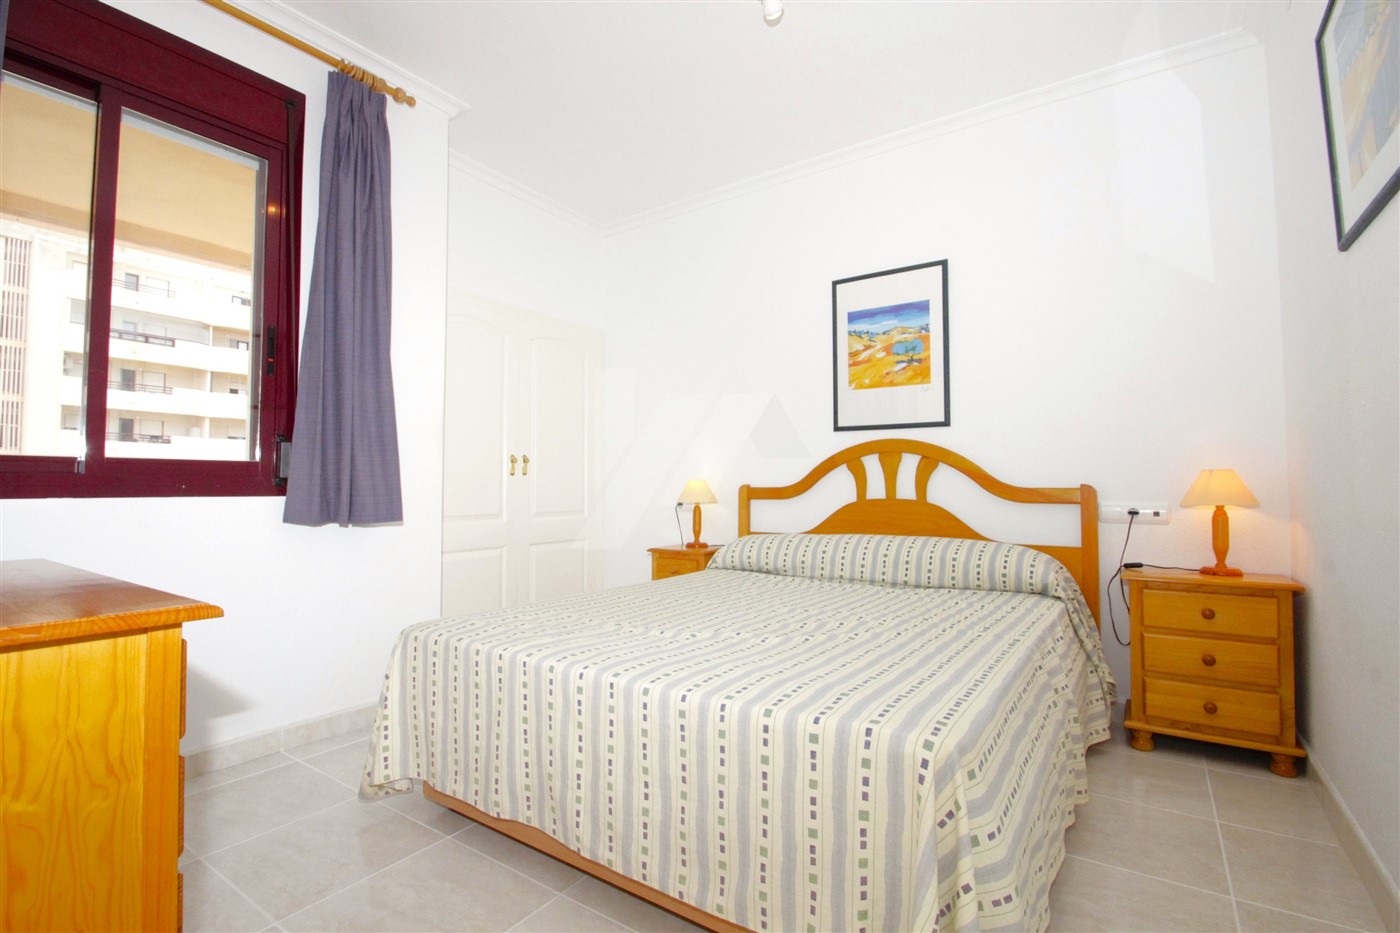 Flat with sea views in first line of Calpe, Costa Blanca.